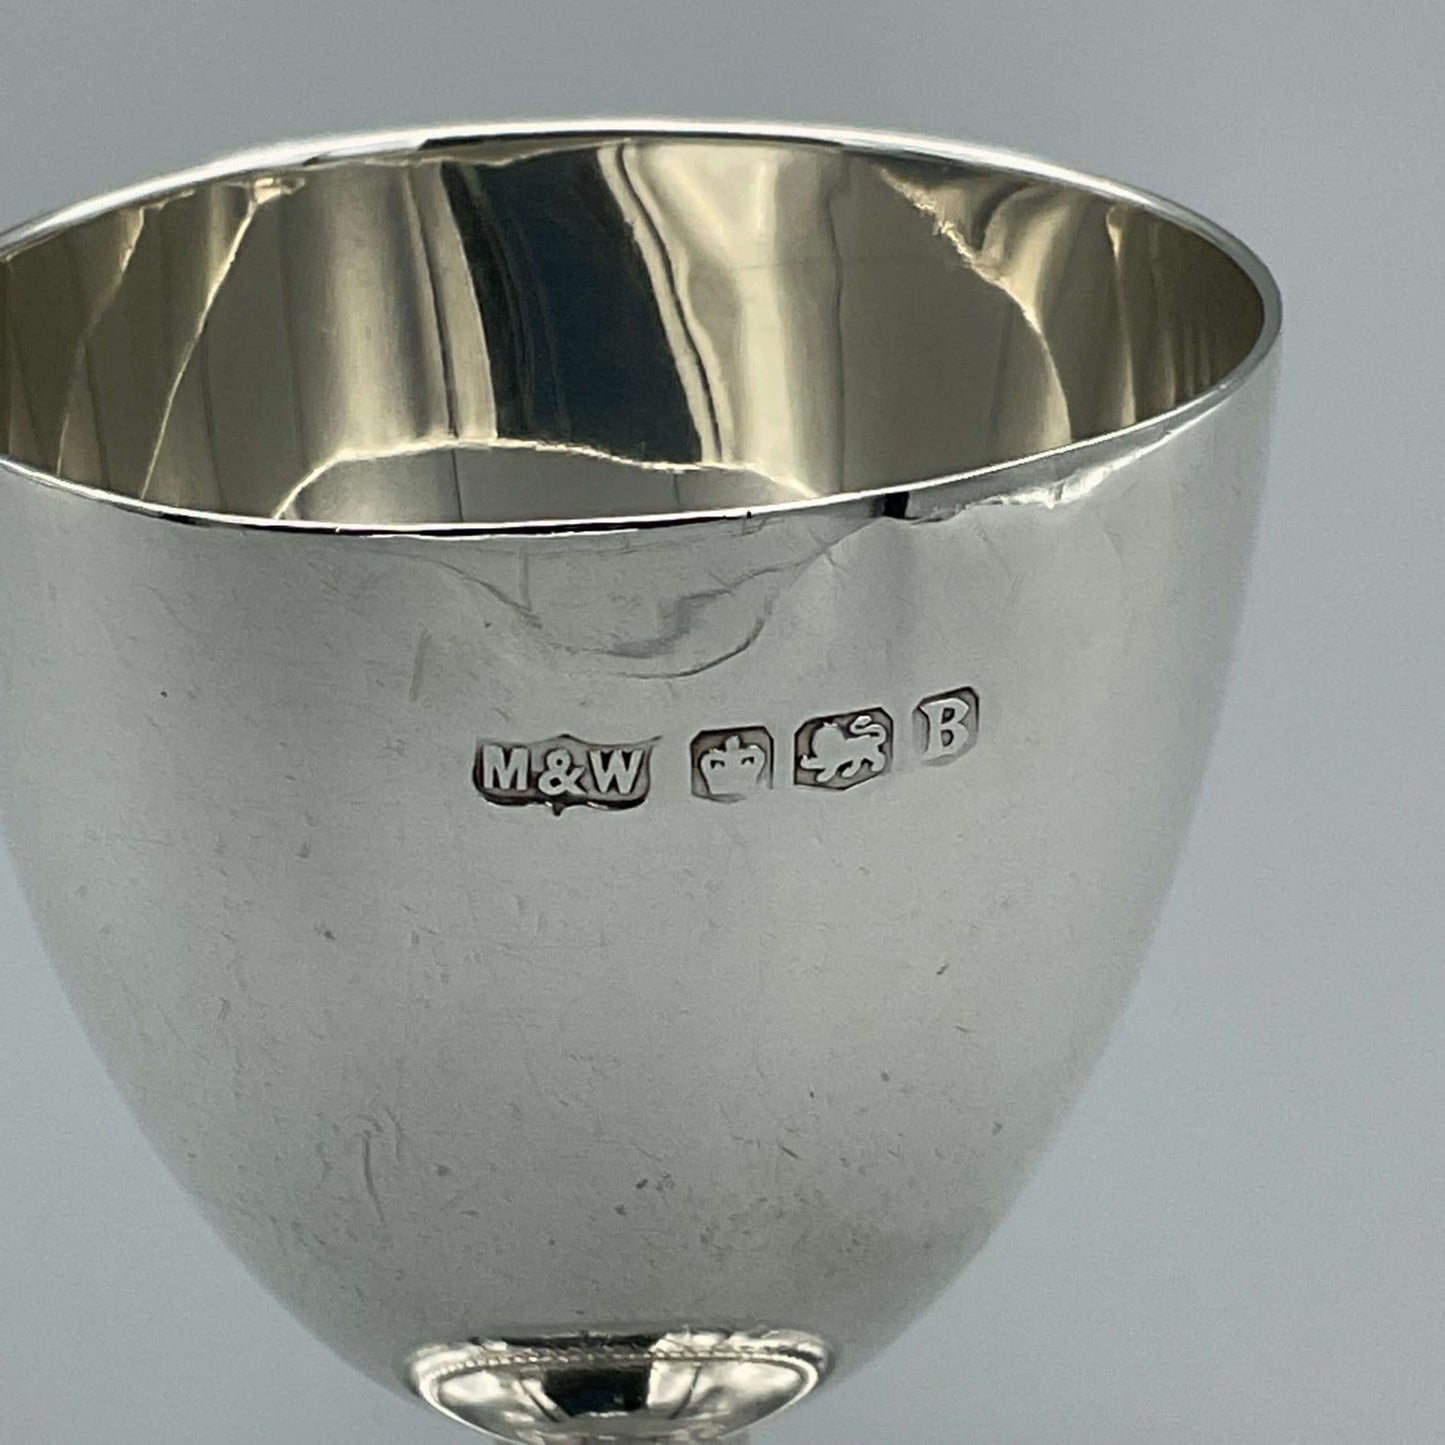 1944 Sterling Silver Egg Cup, Christening or Baby Gift